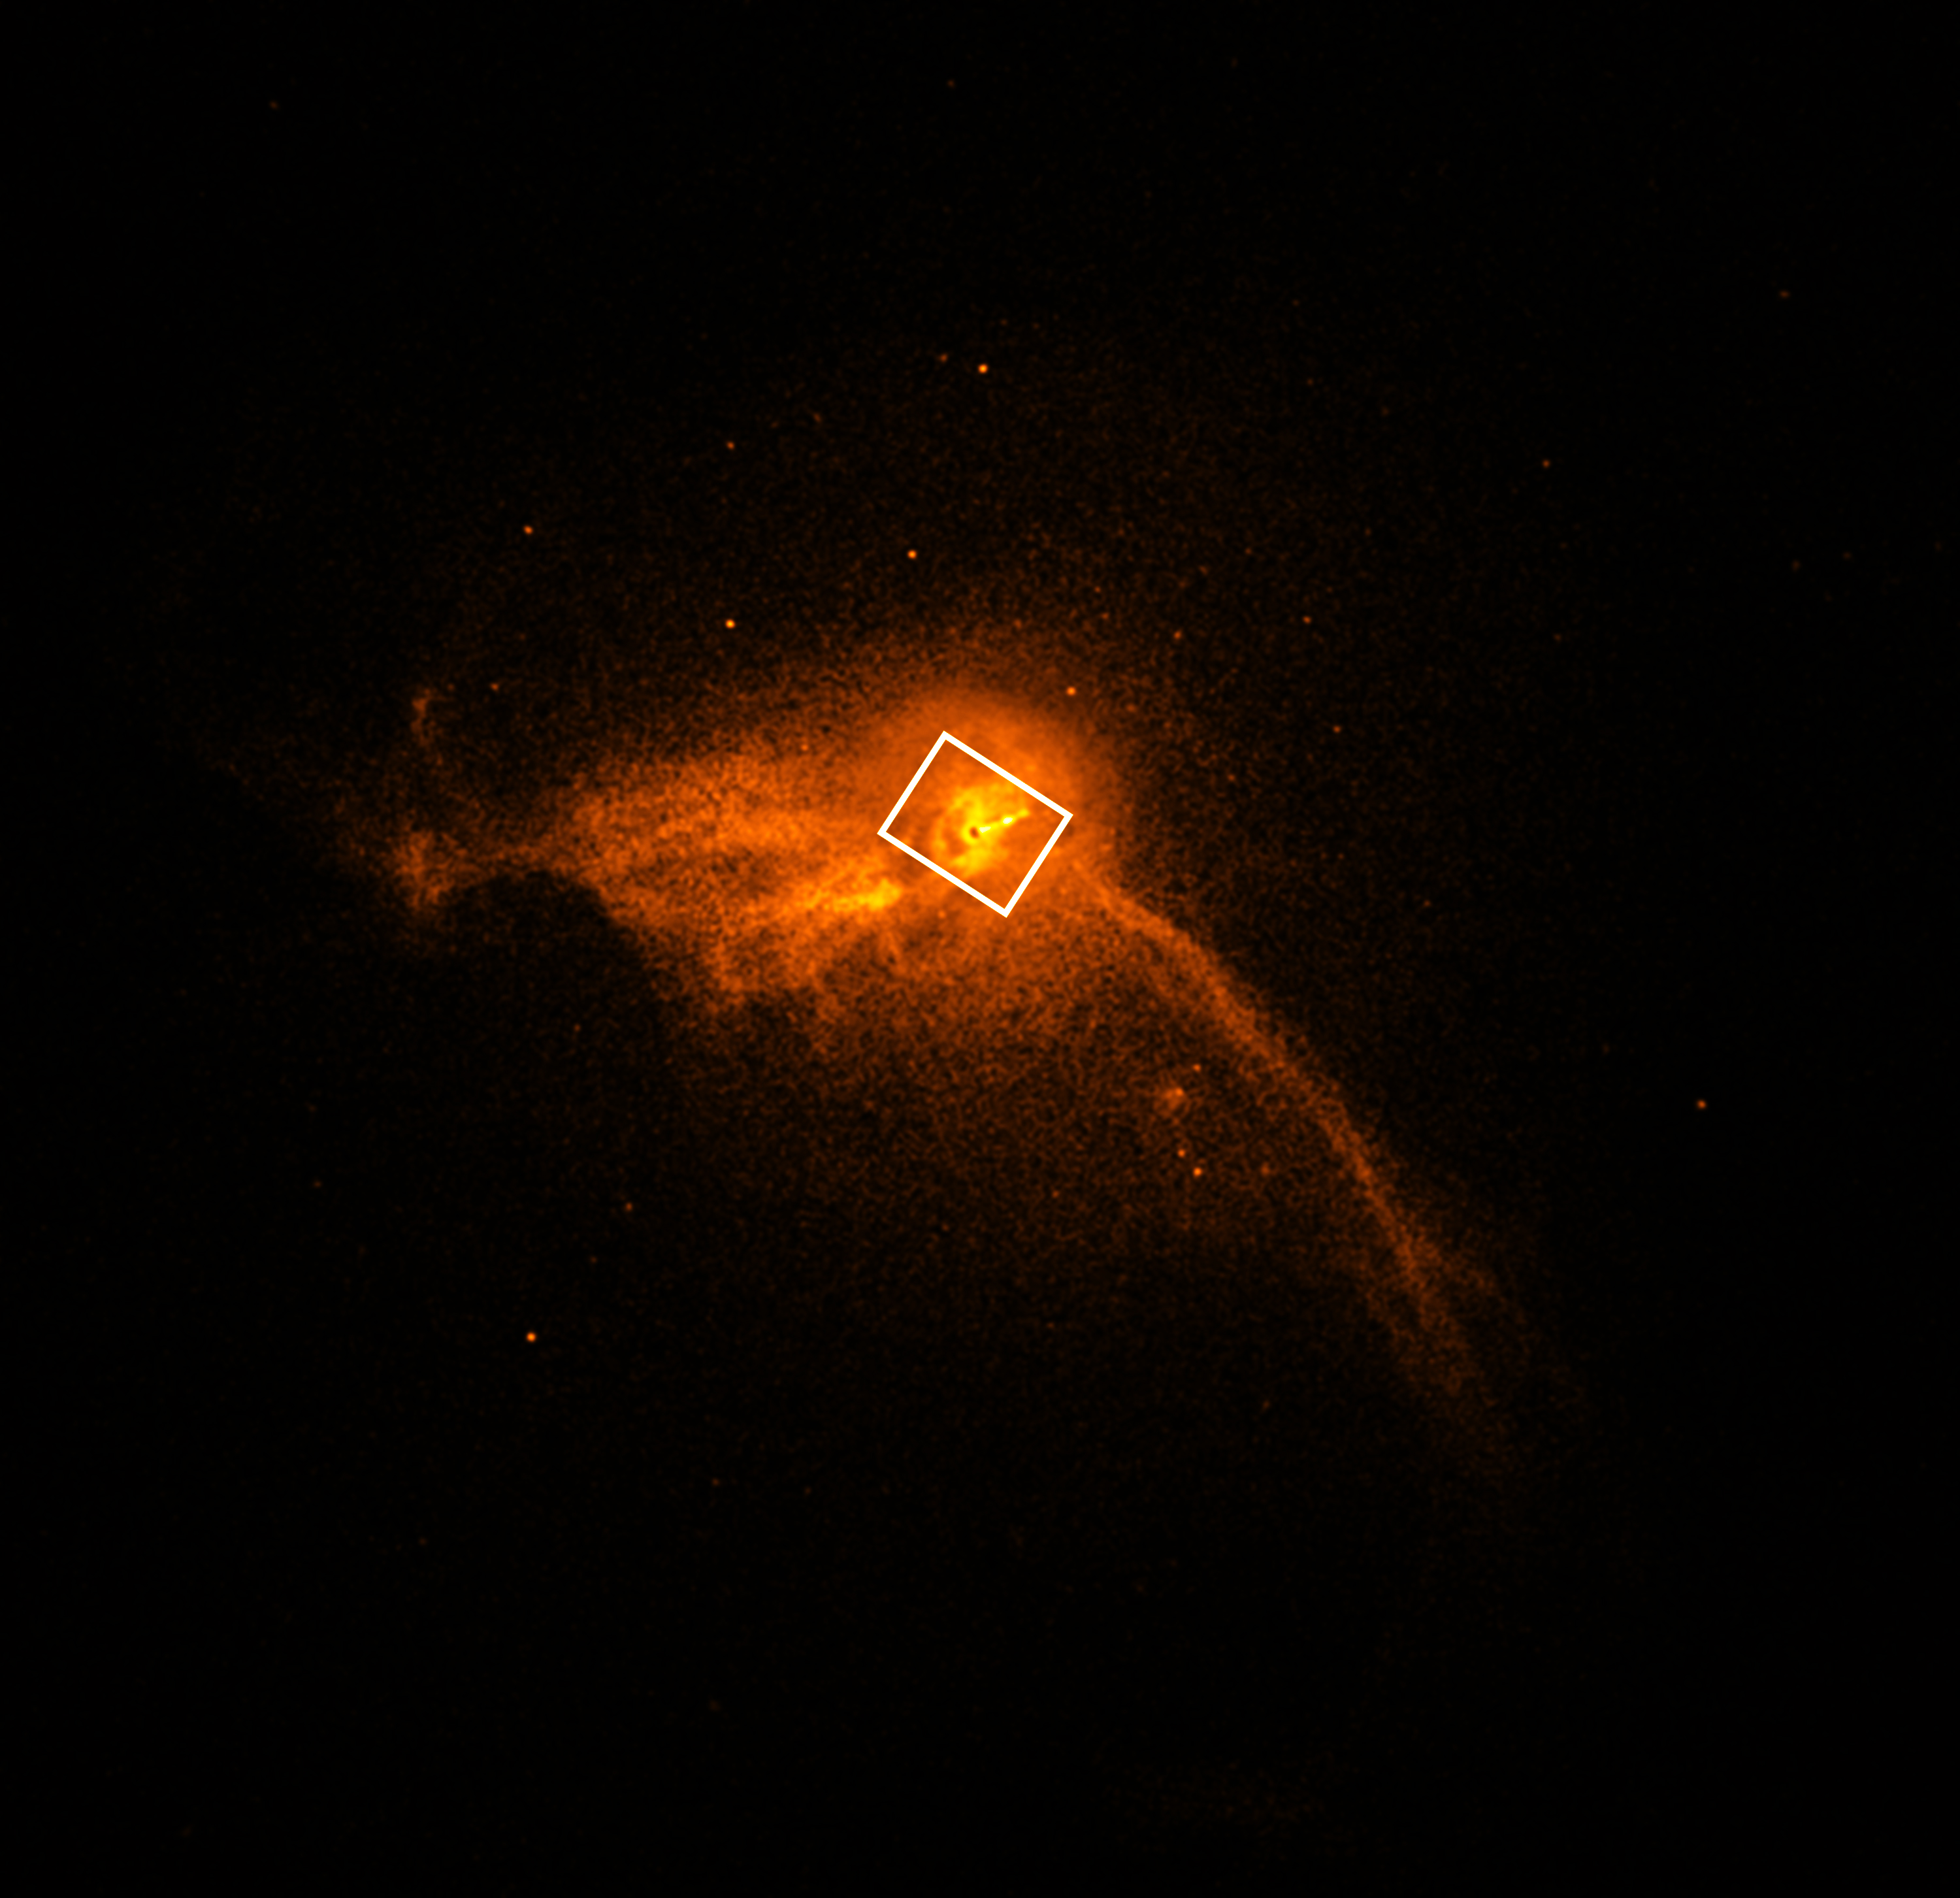 An image showing a smattering of orange stars against the black backdrop of space with a small black circle in the middle and a rectangle identifying the location of the M87 black hole.